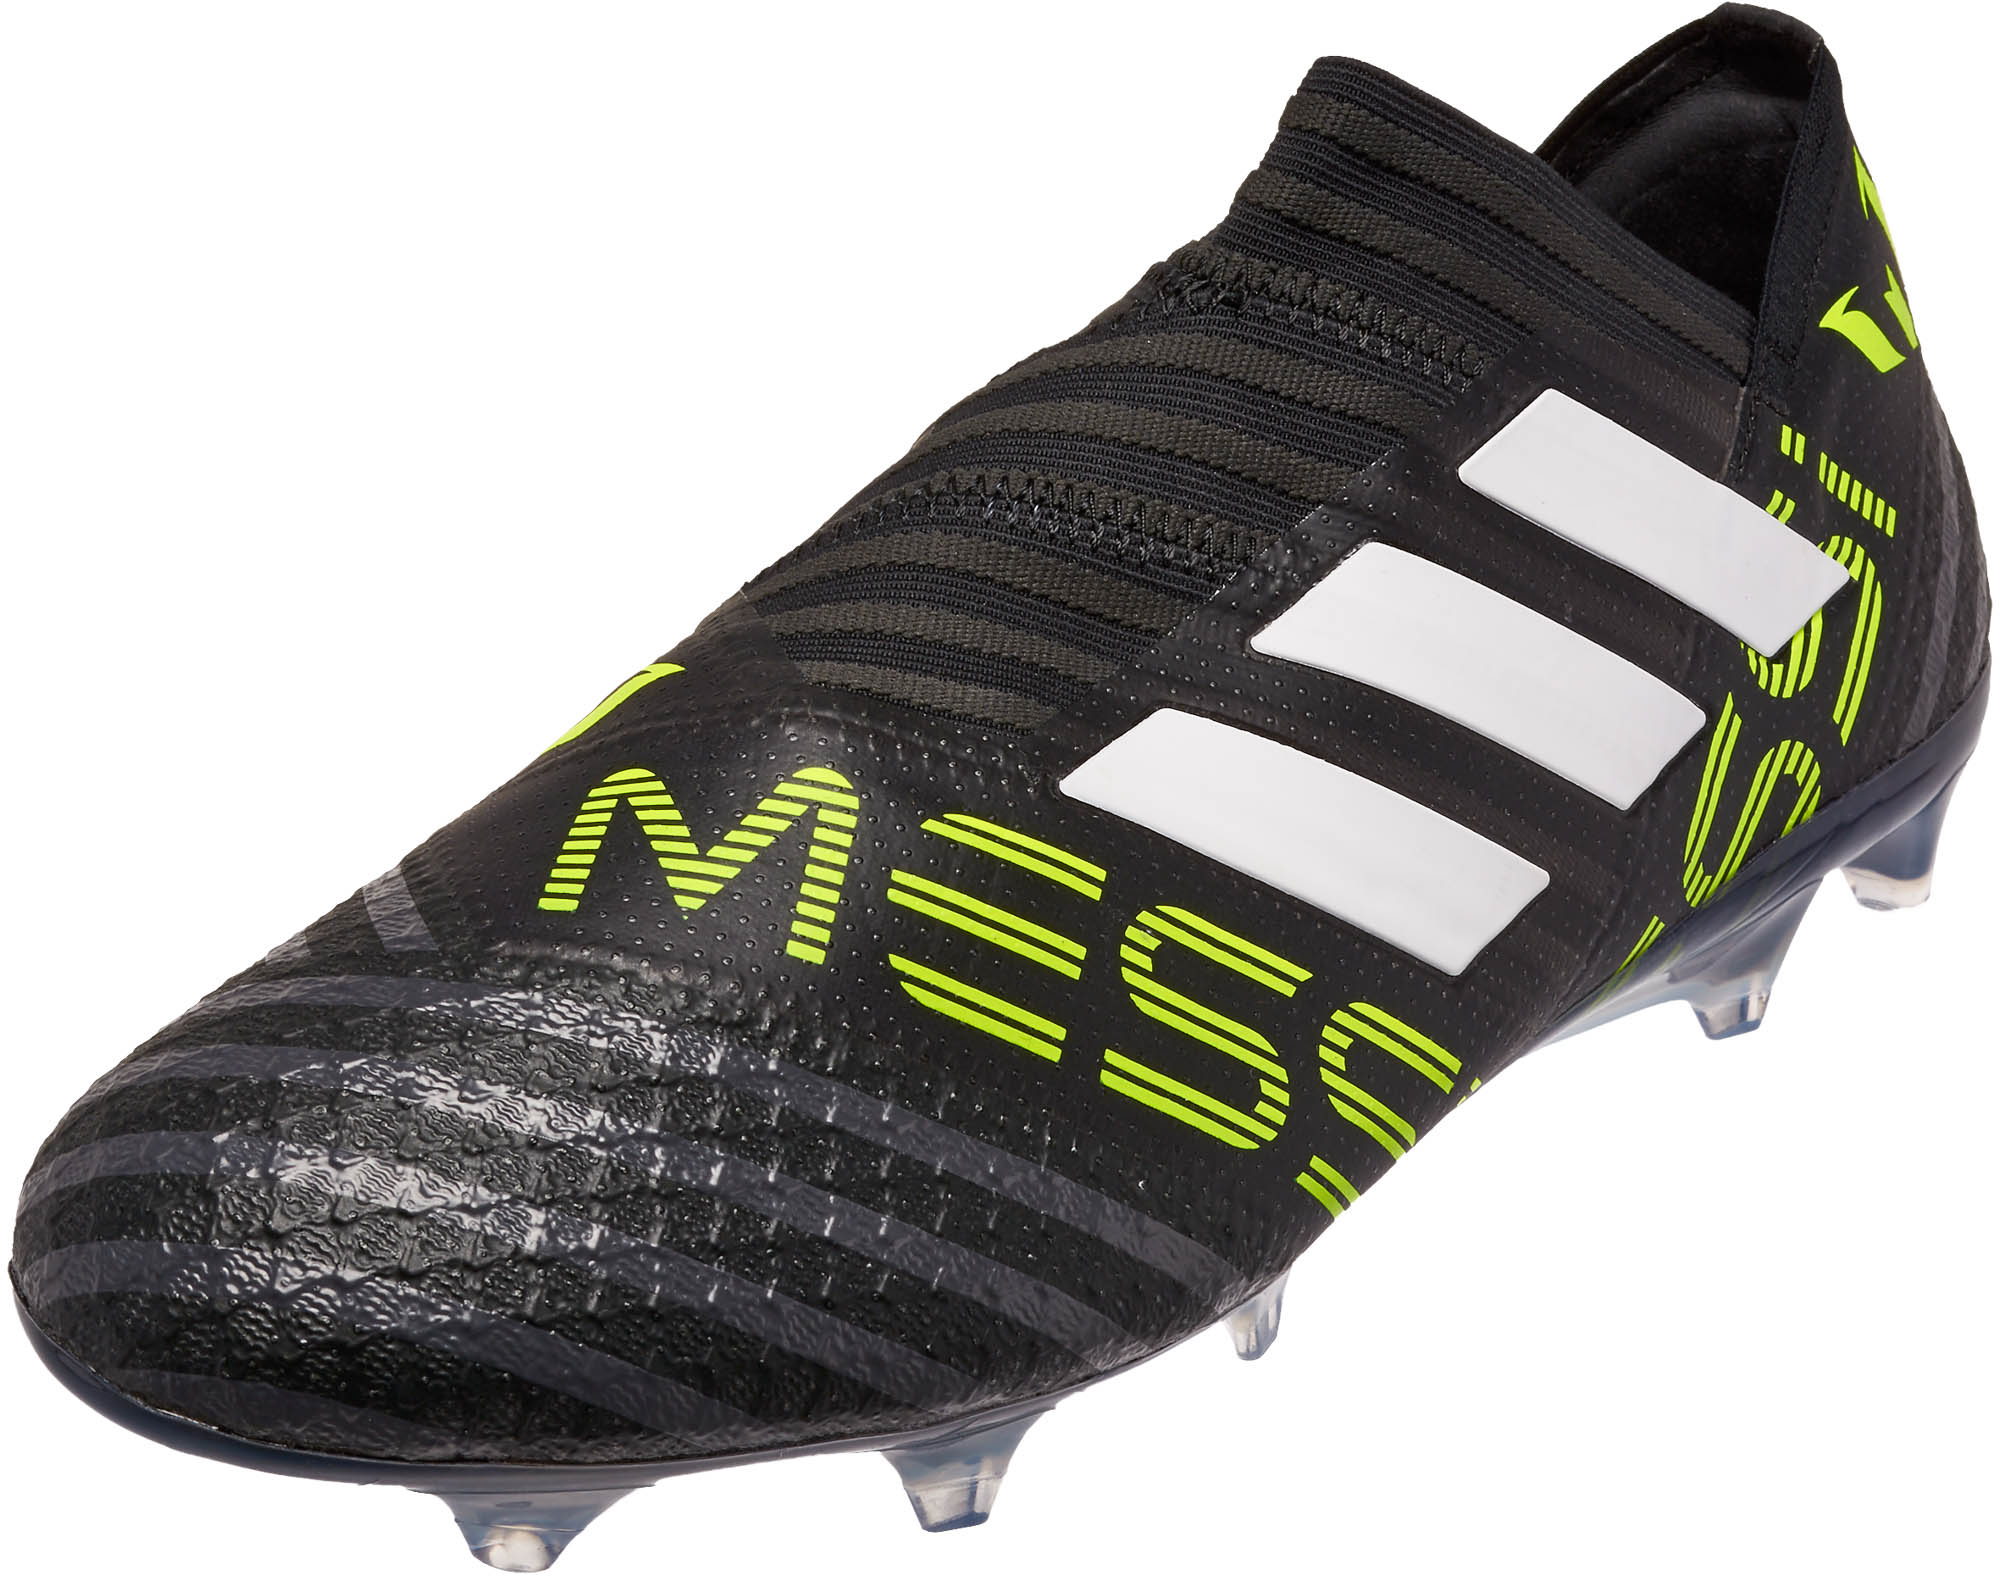 messi football shoes 2018